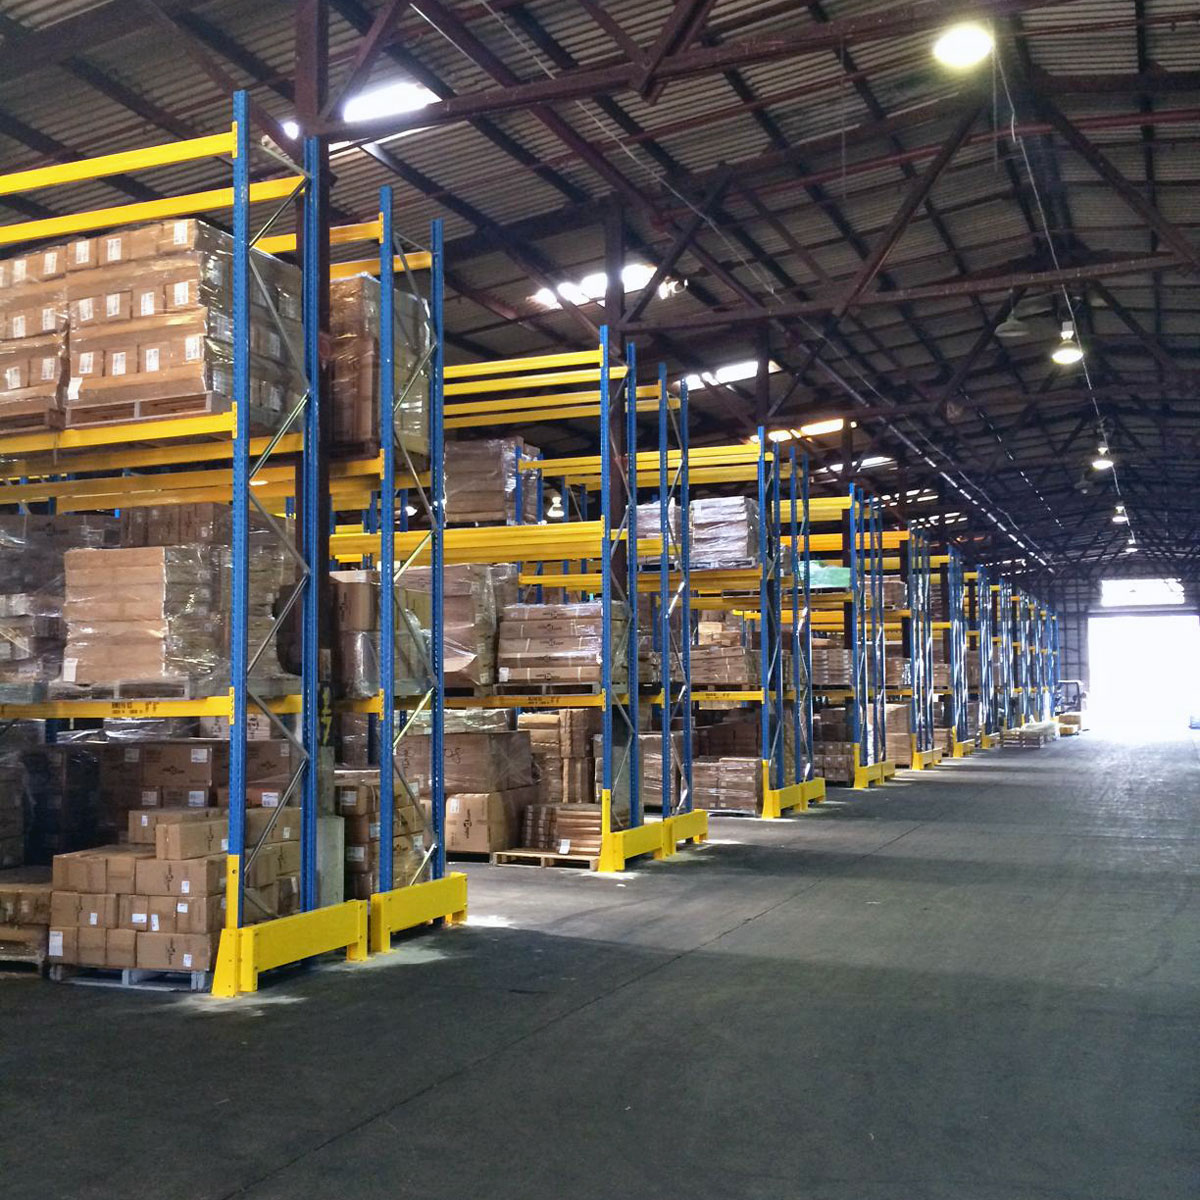 Over 2,500 Selective Racking pallet positions